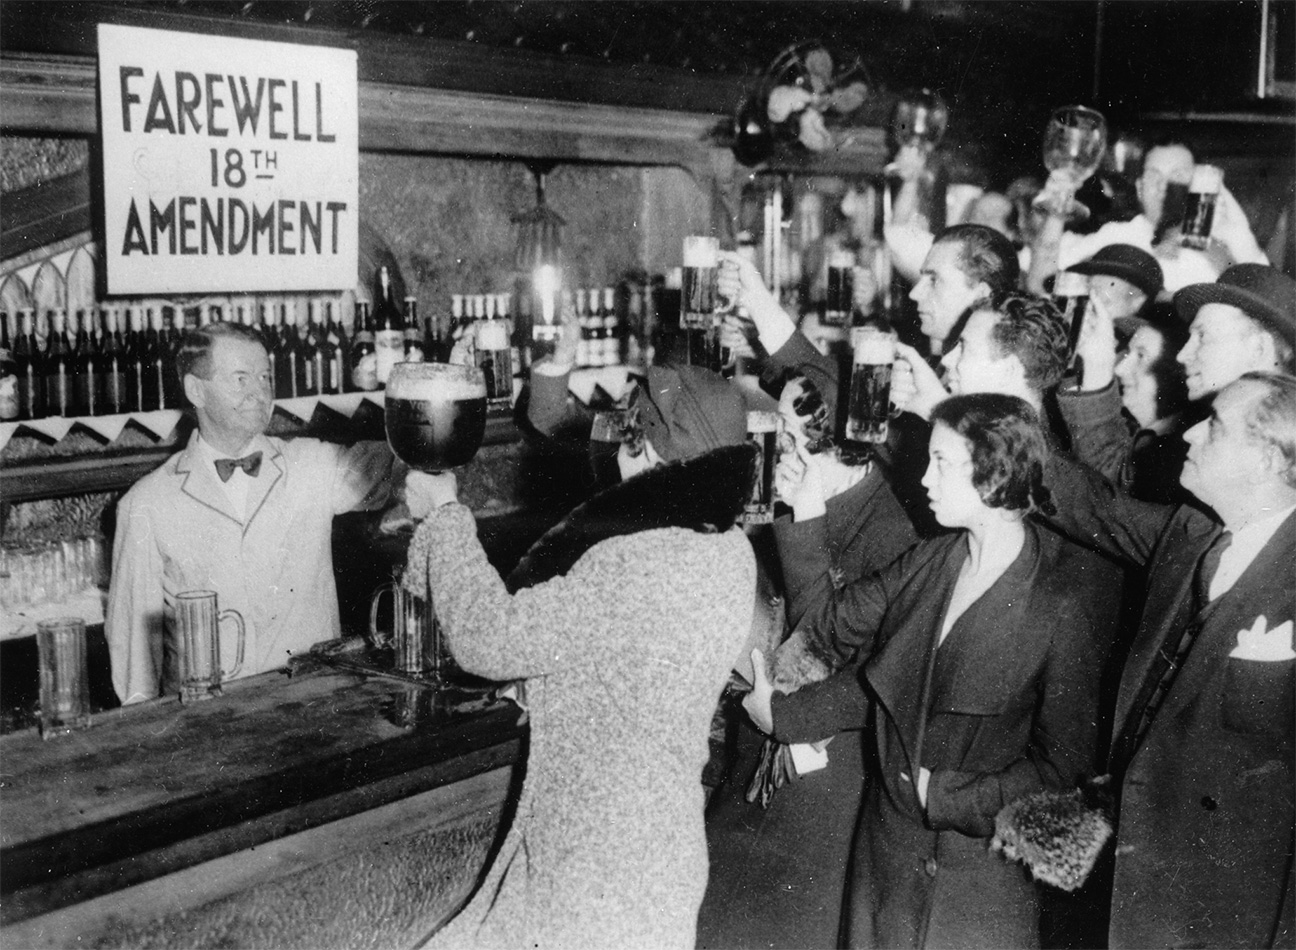 On December 5, 1933, Americans everywhere celebrated the end of Prohibition and the repeal of the 18th Amendment.